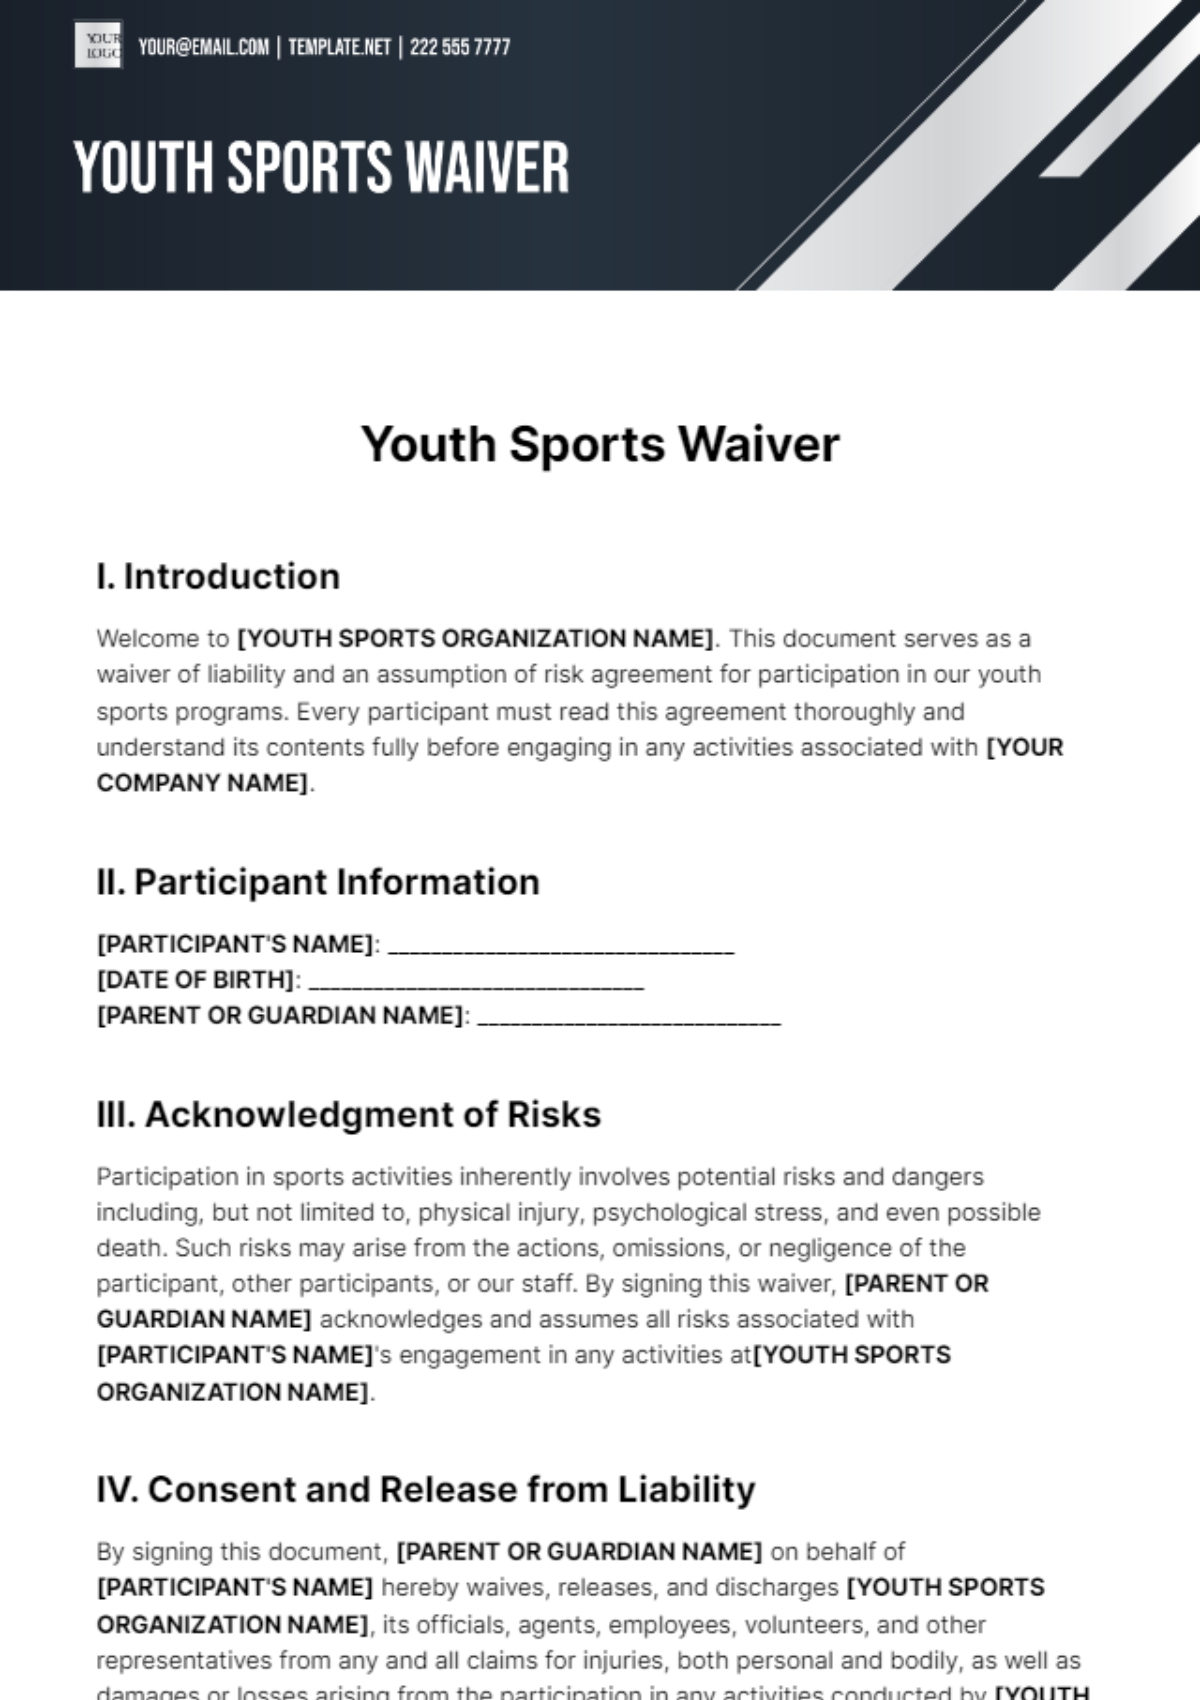 Youth Sports Waiver Template